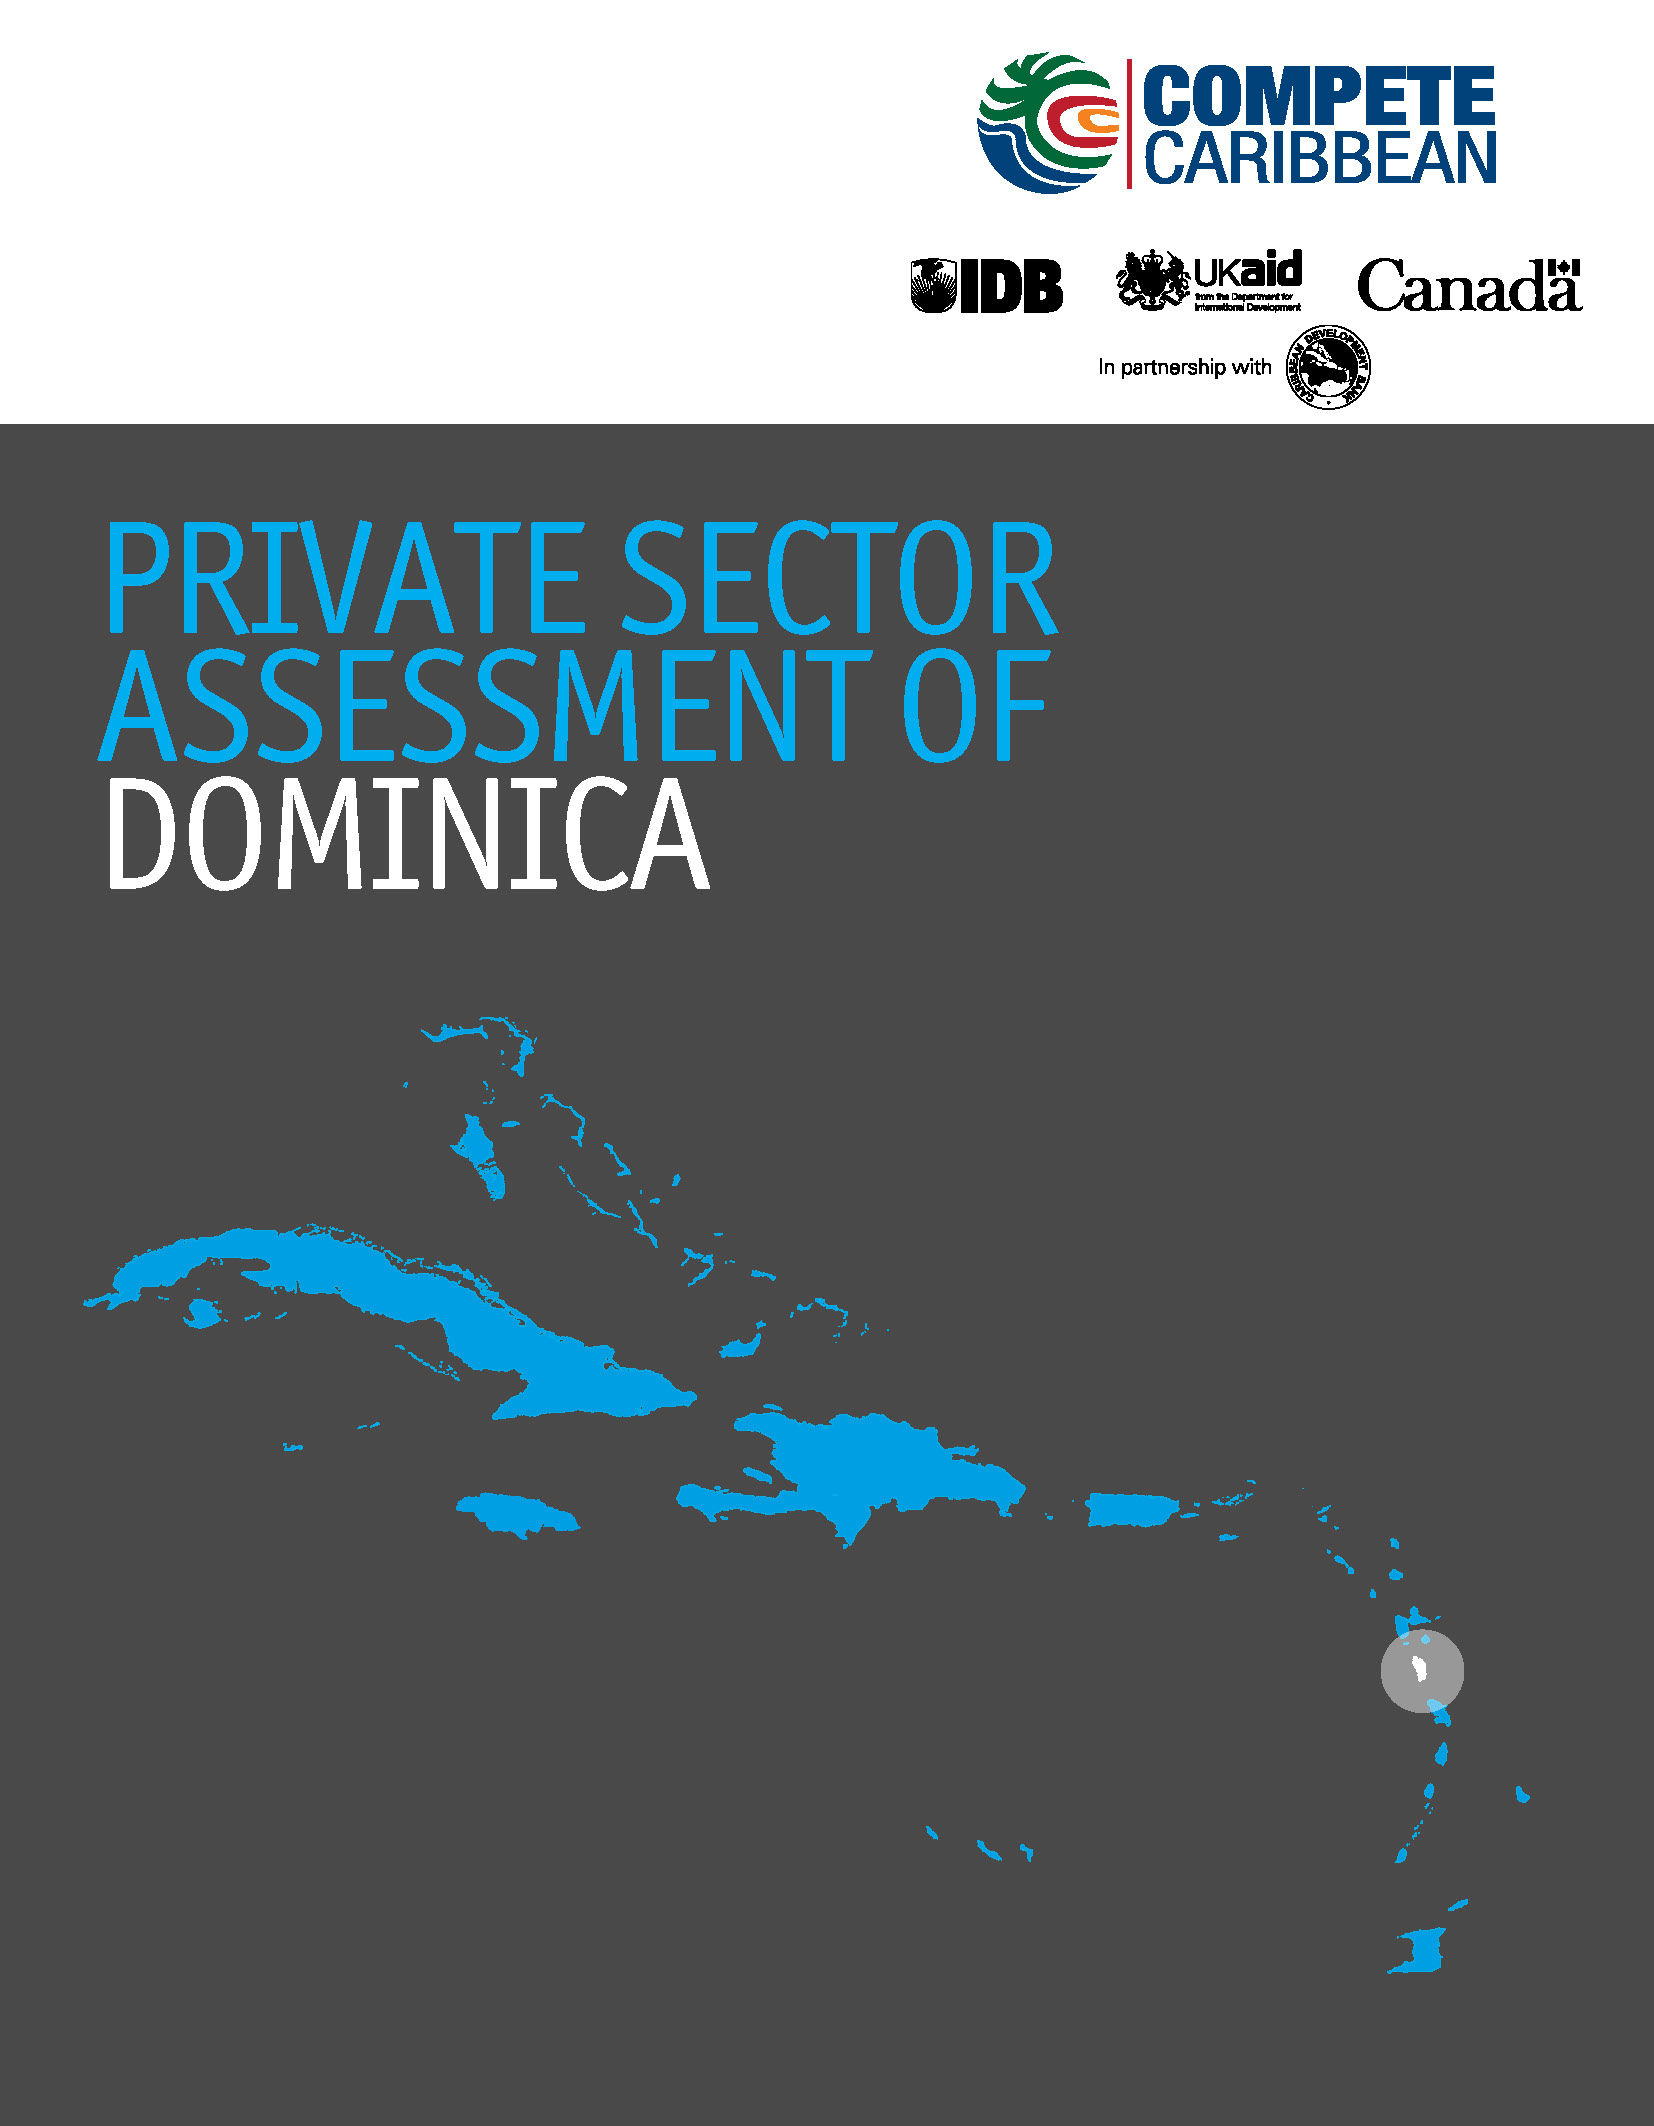 cover showing island chain with Dominica highlighted